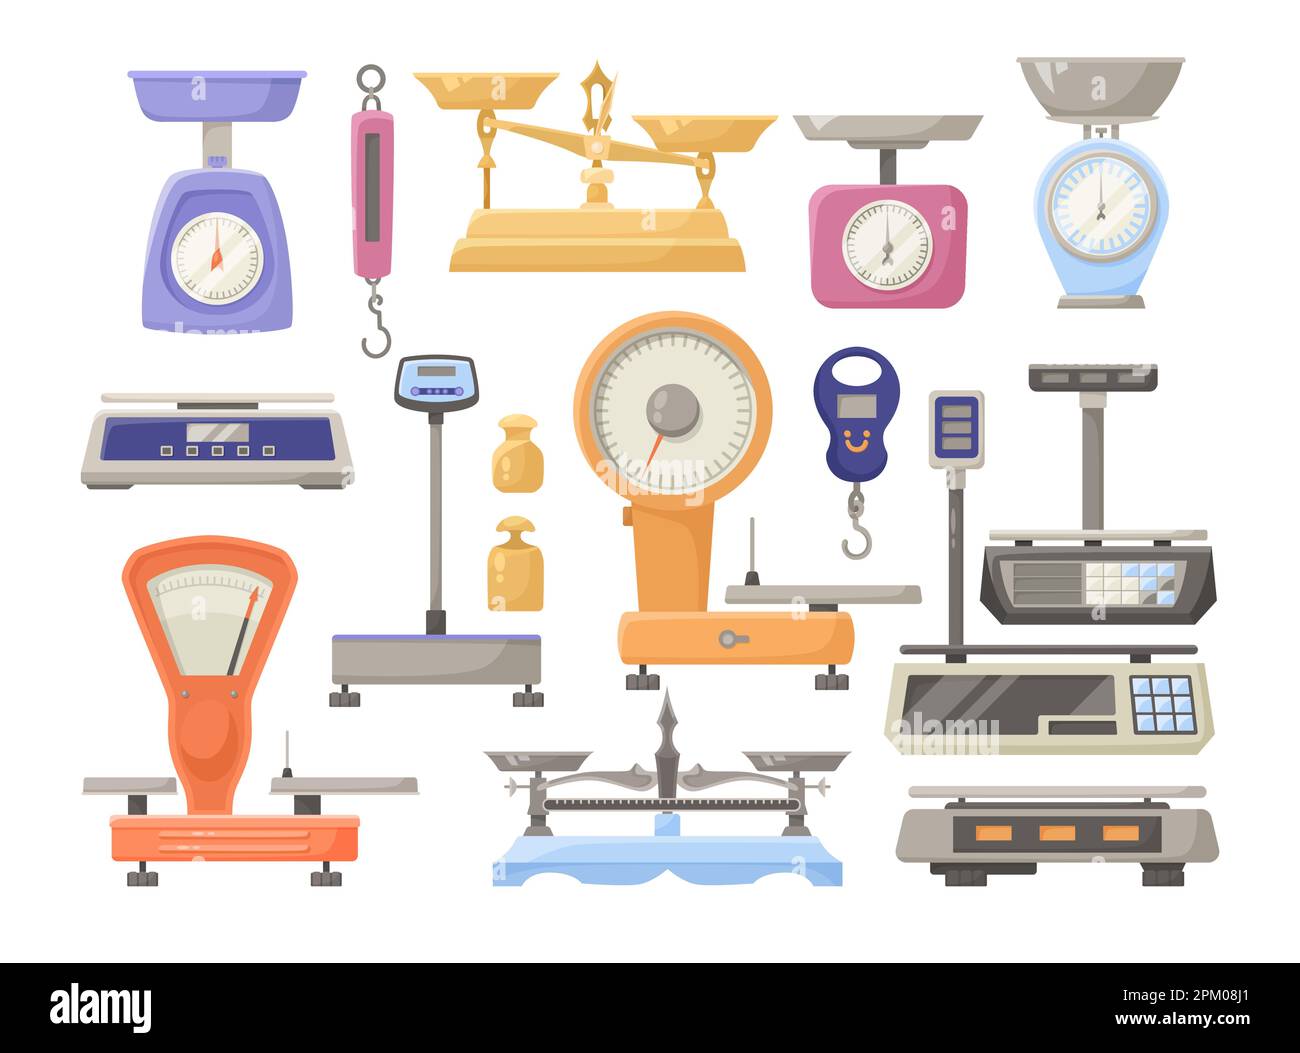 https://c8.alamy.com/comp/2PM08J1/different-scales-for-store-or-kitchen-vector-illustrations-set-2PM08J1.jpg